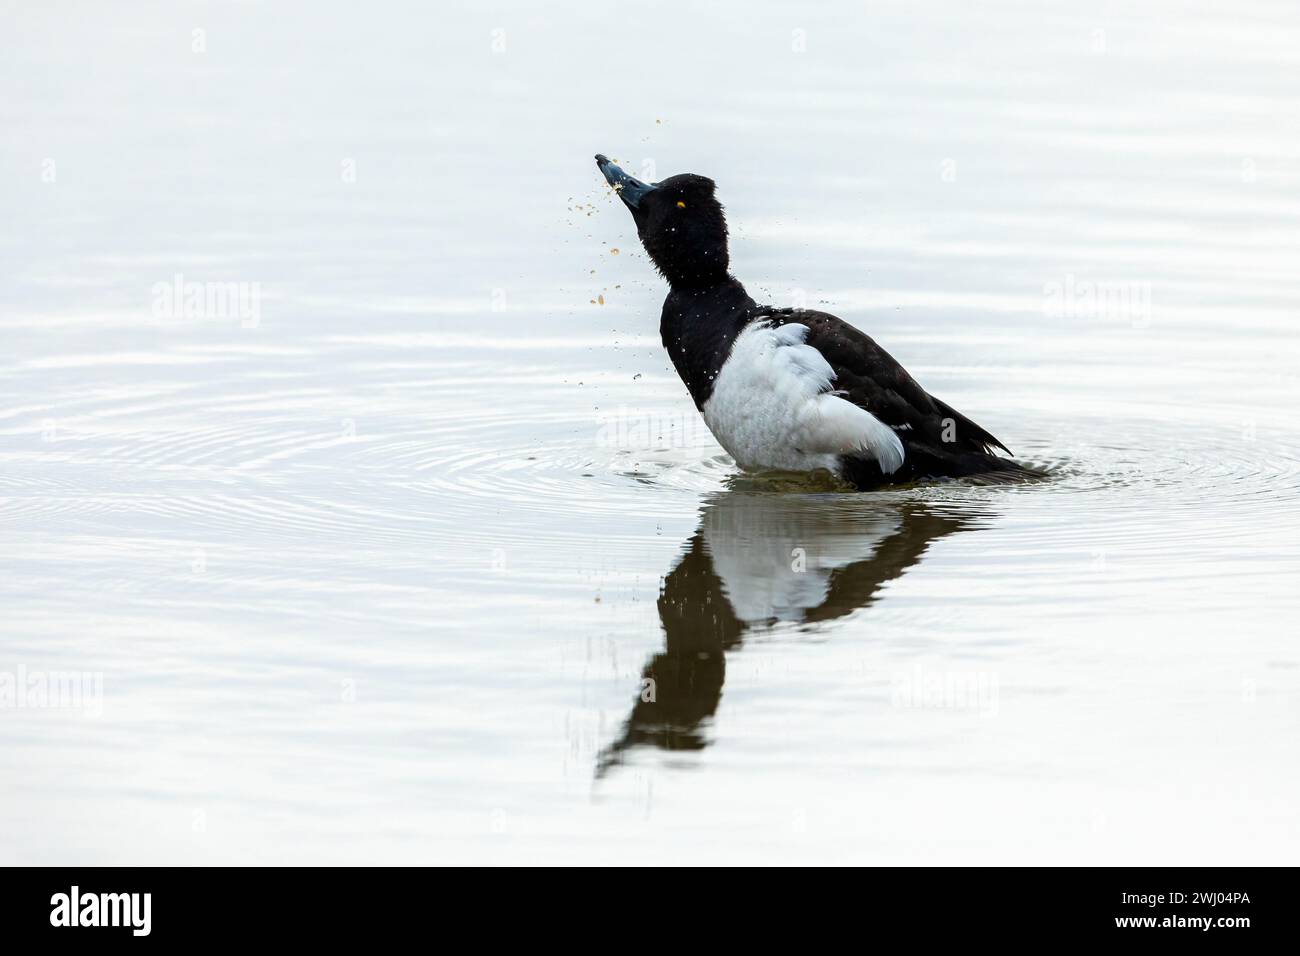 A tufted duck on the water Stock Photo